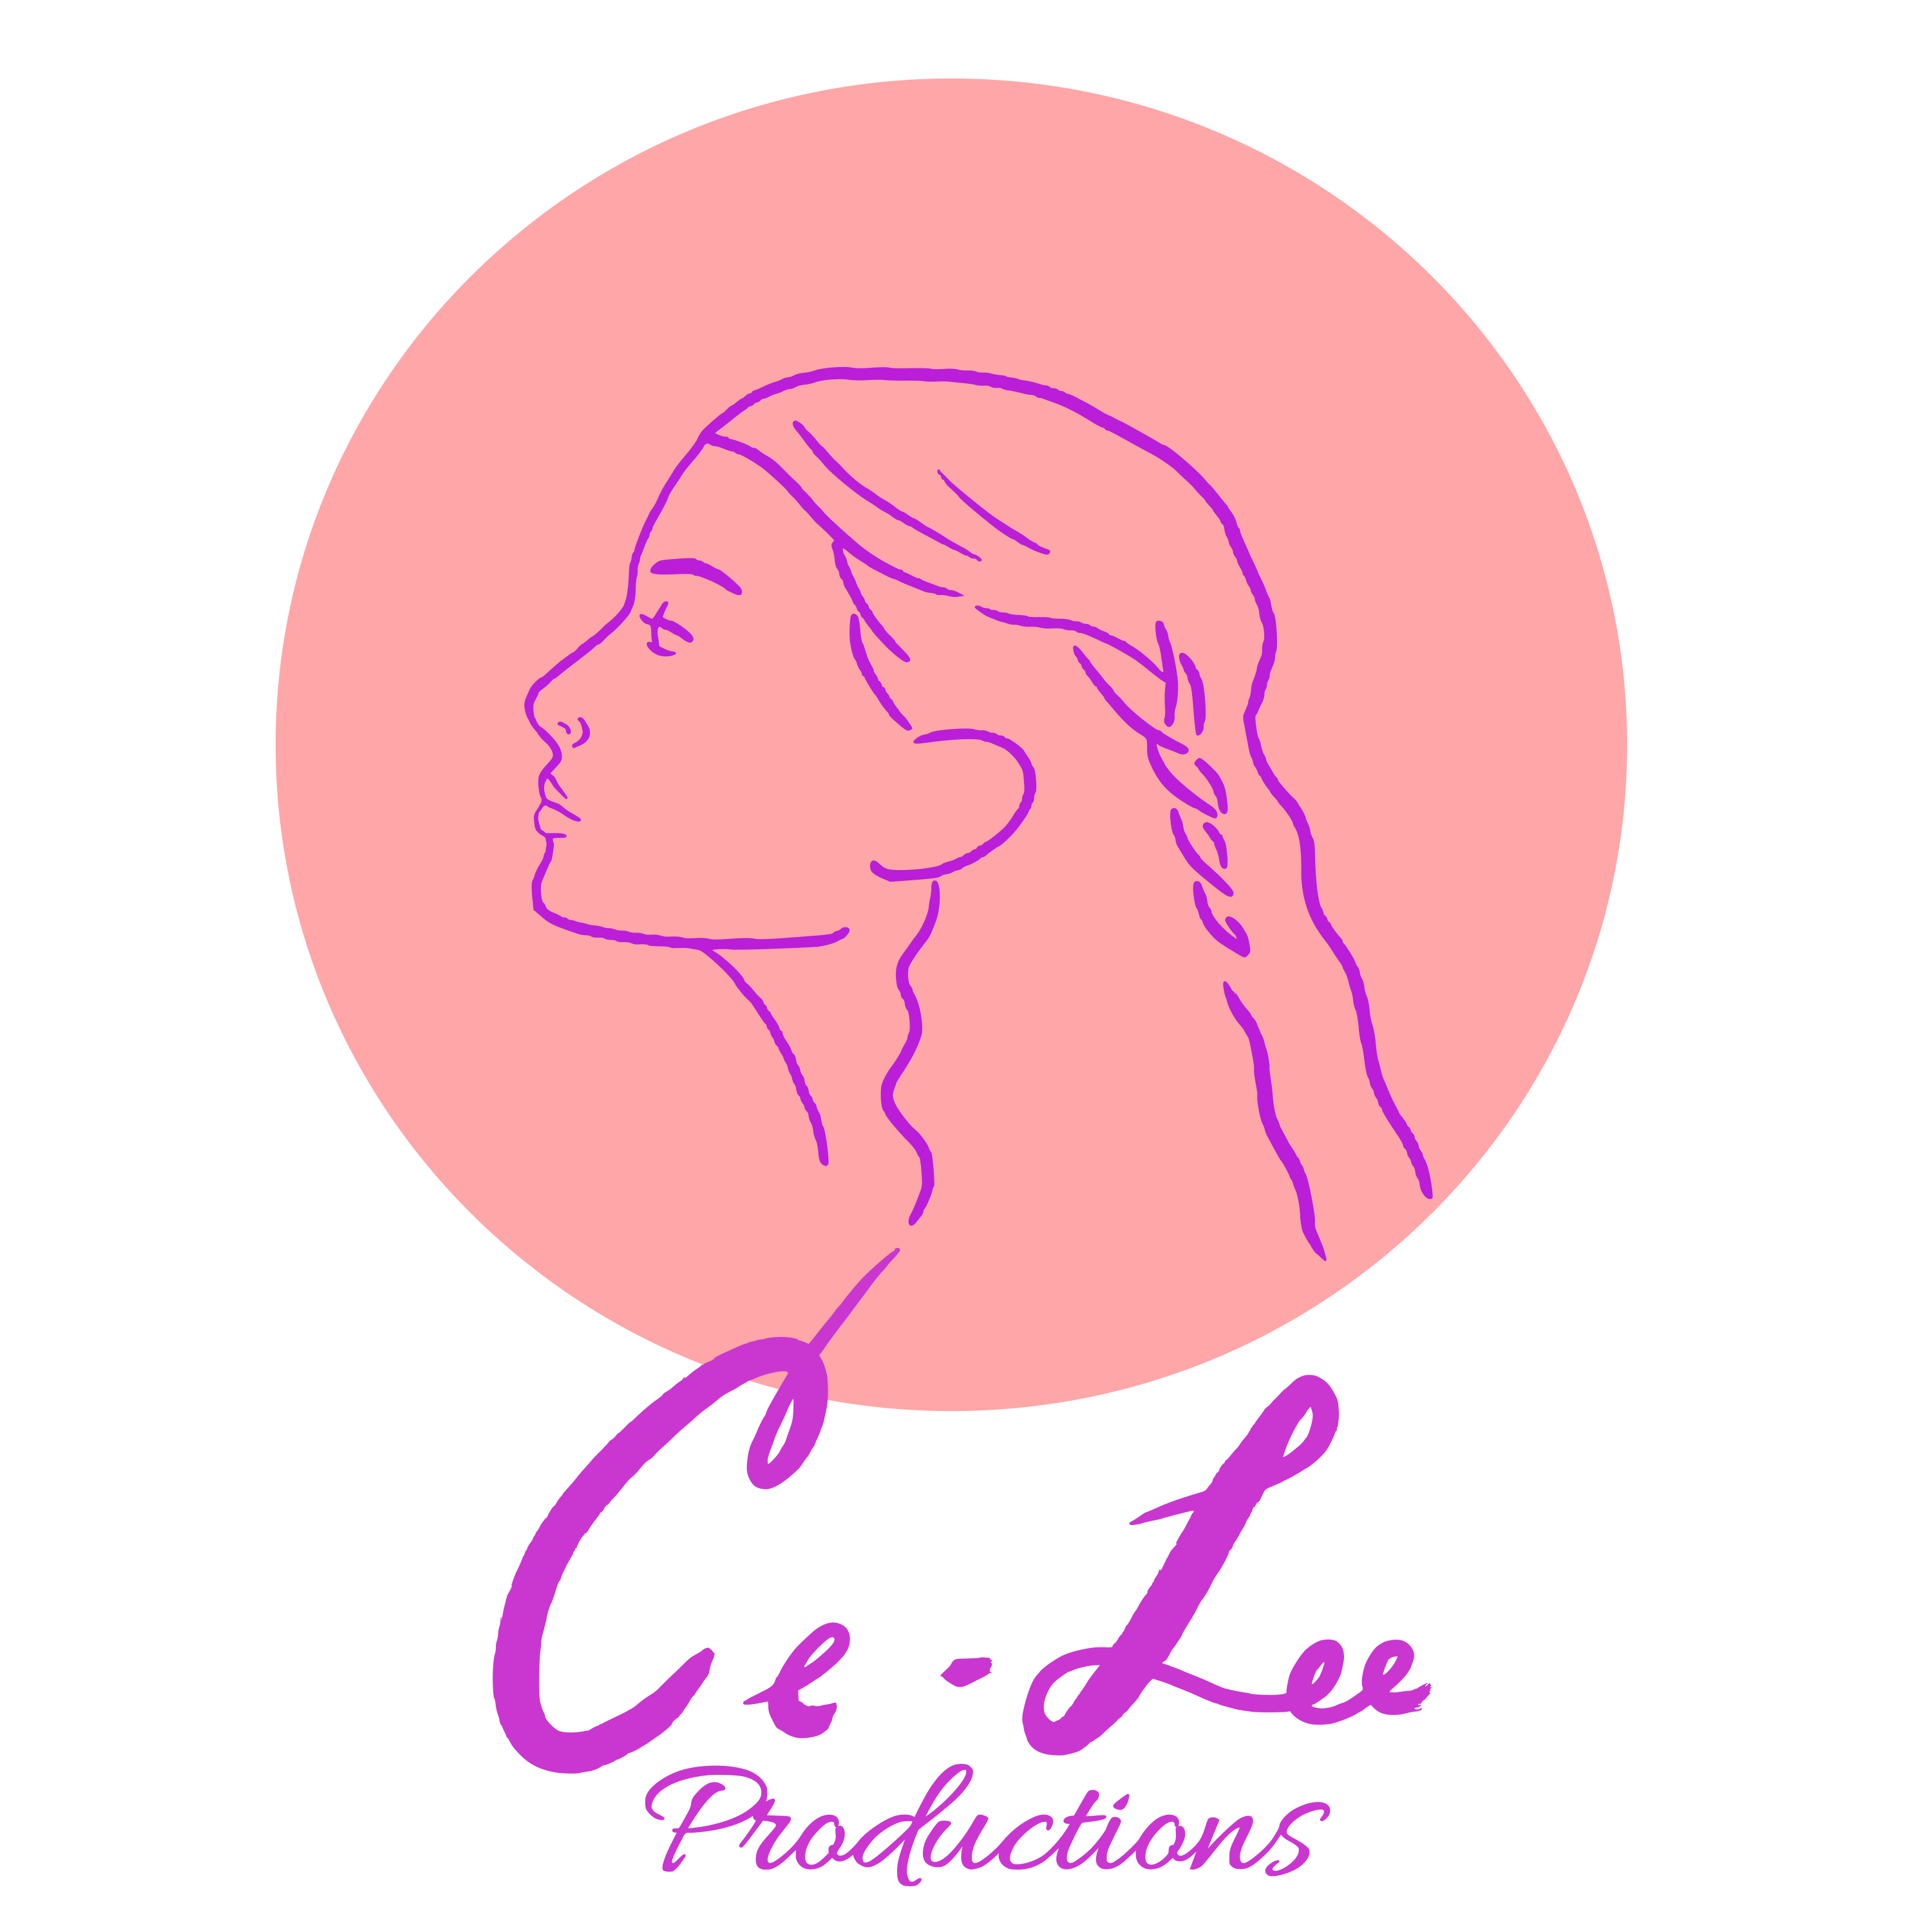 Ce-Lee Productions